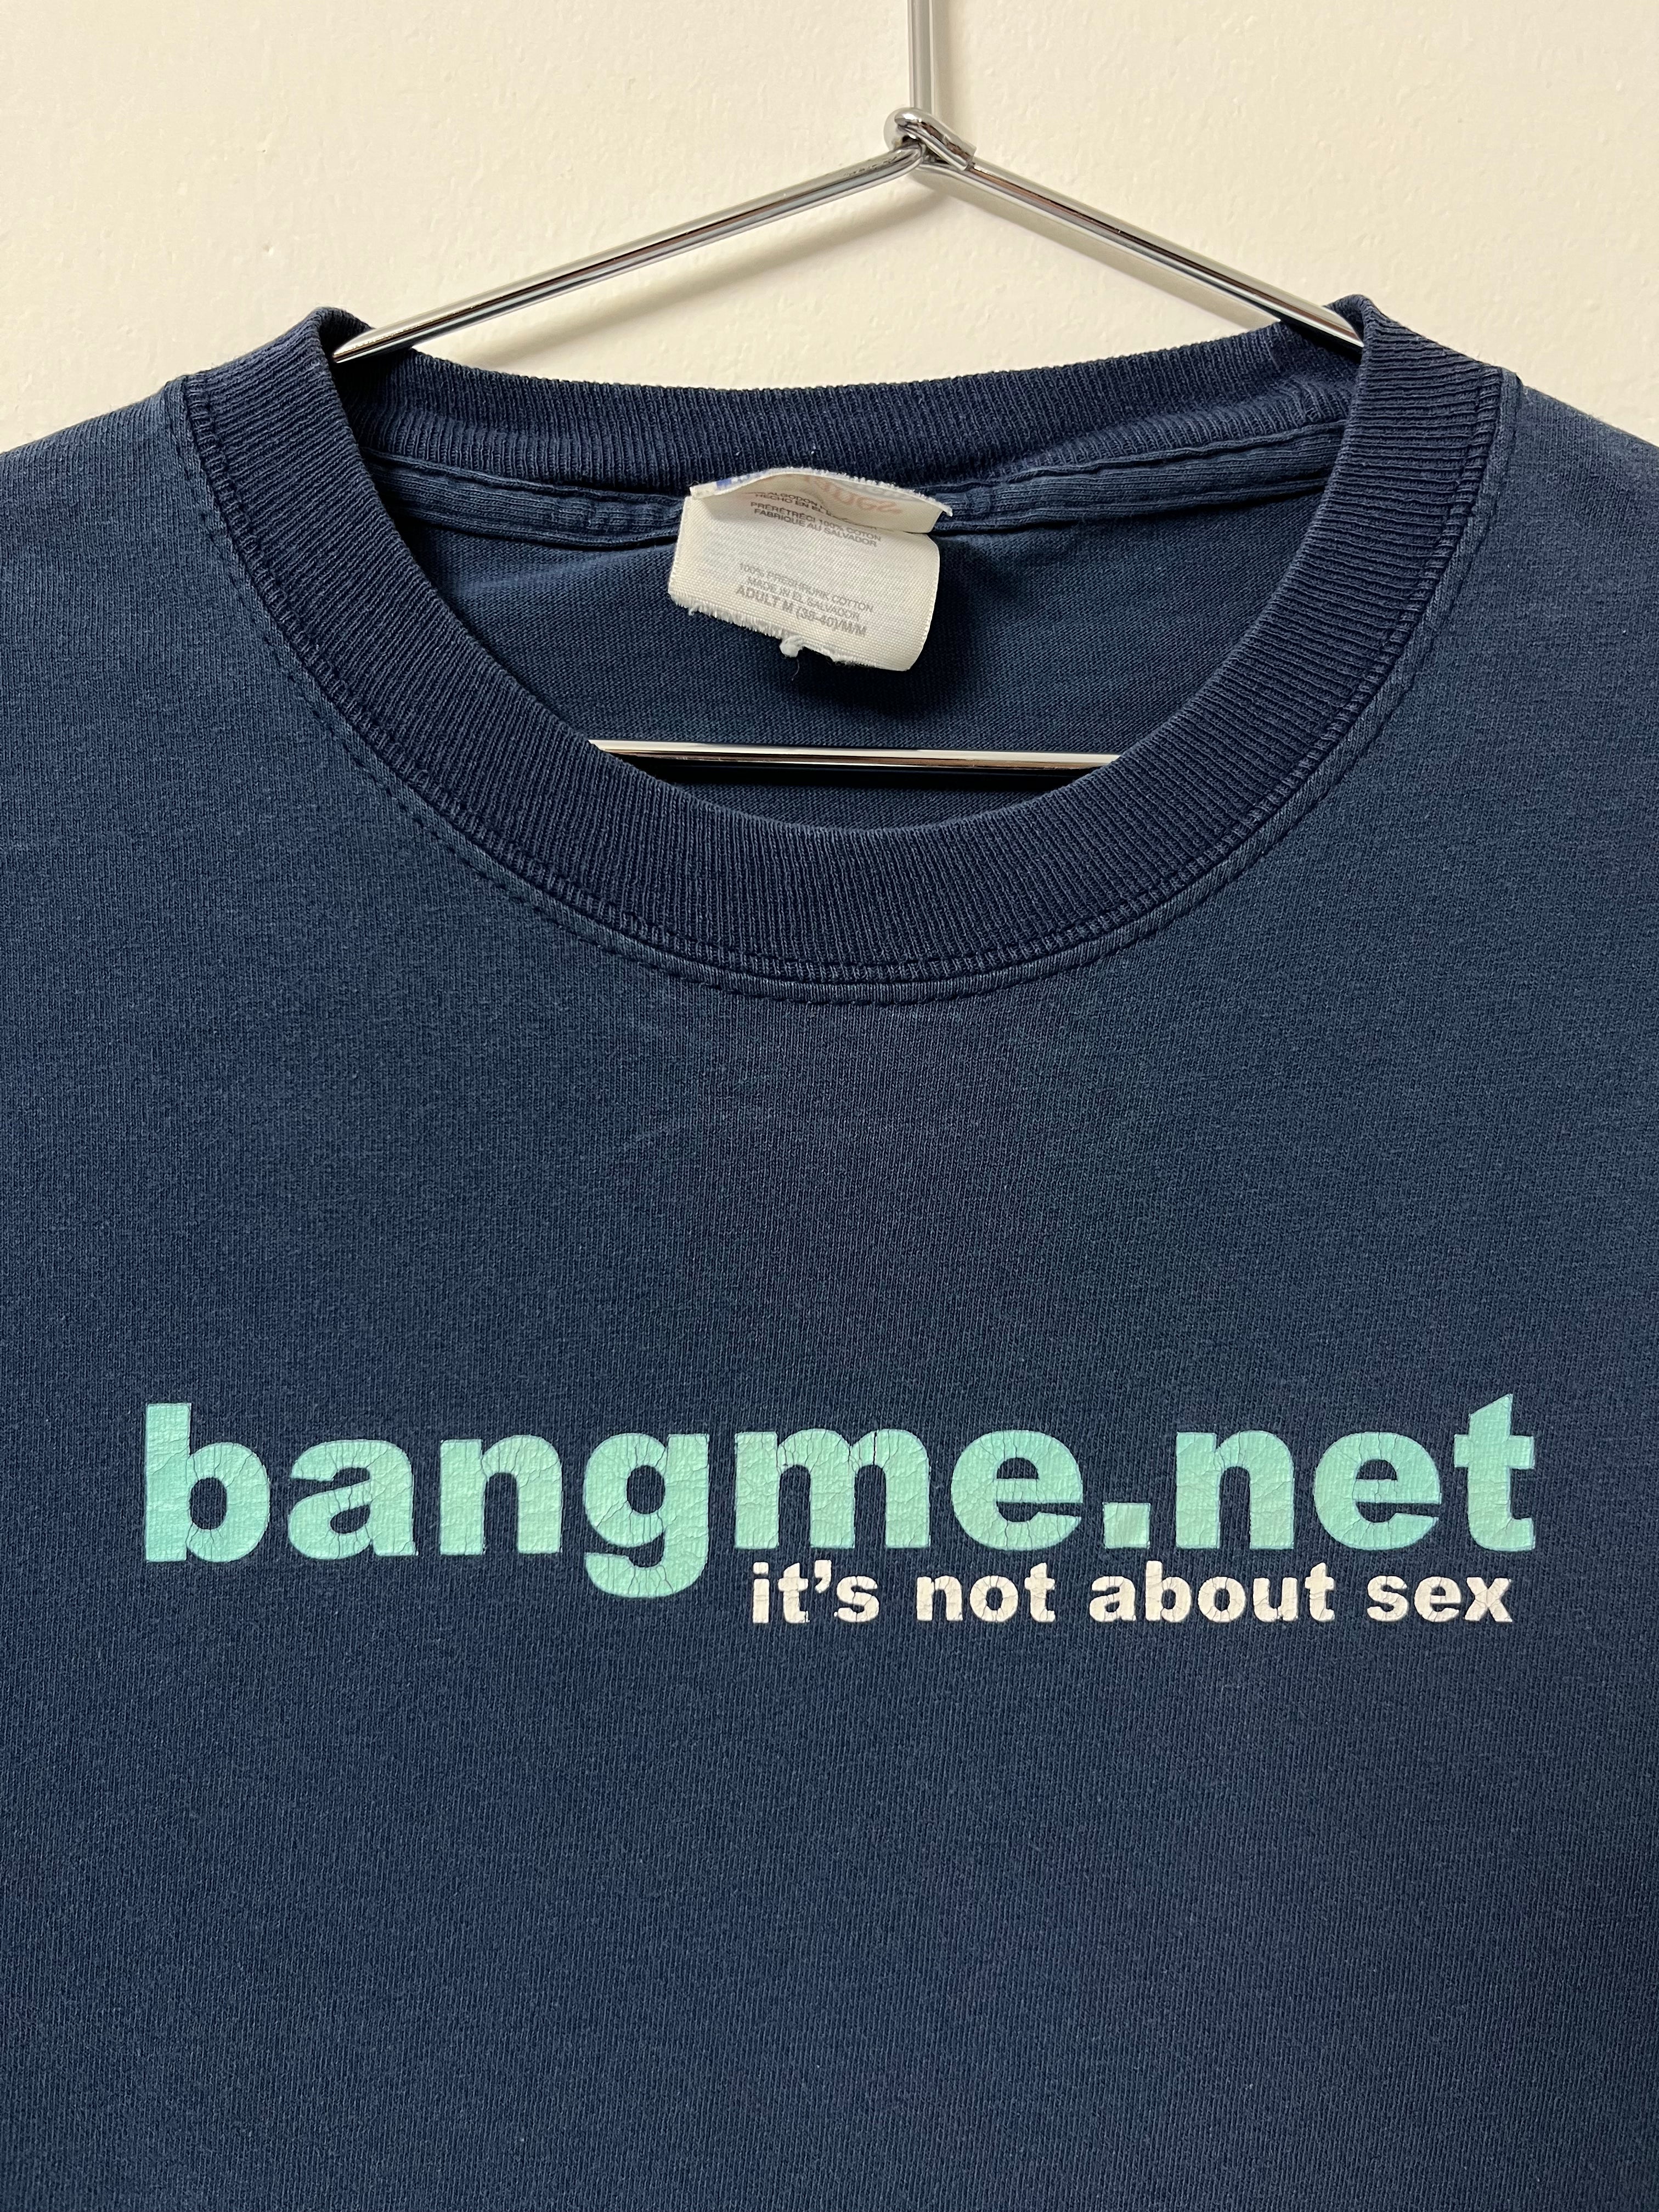 Late 90s ‘Bangme.net’ Novelty T-Shirt - Faded Navy - M